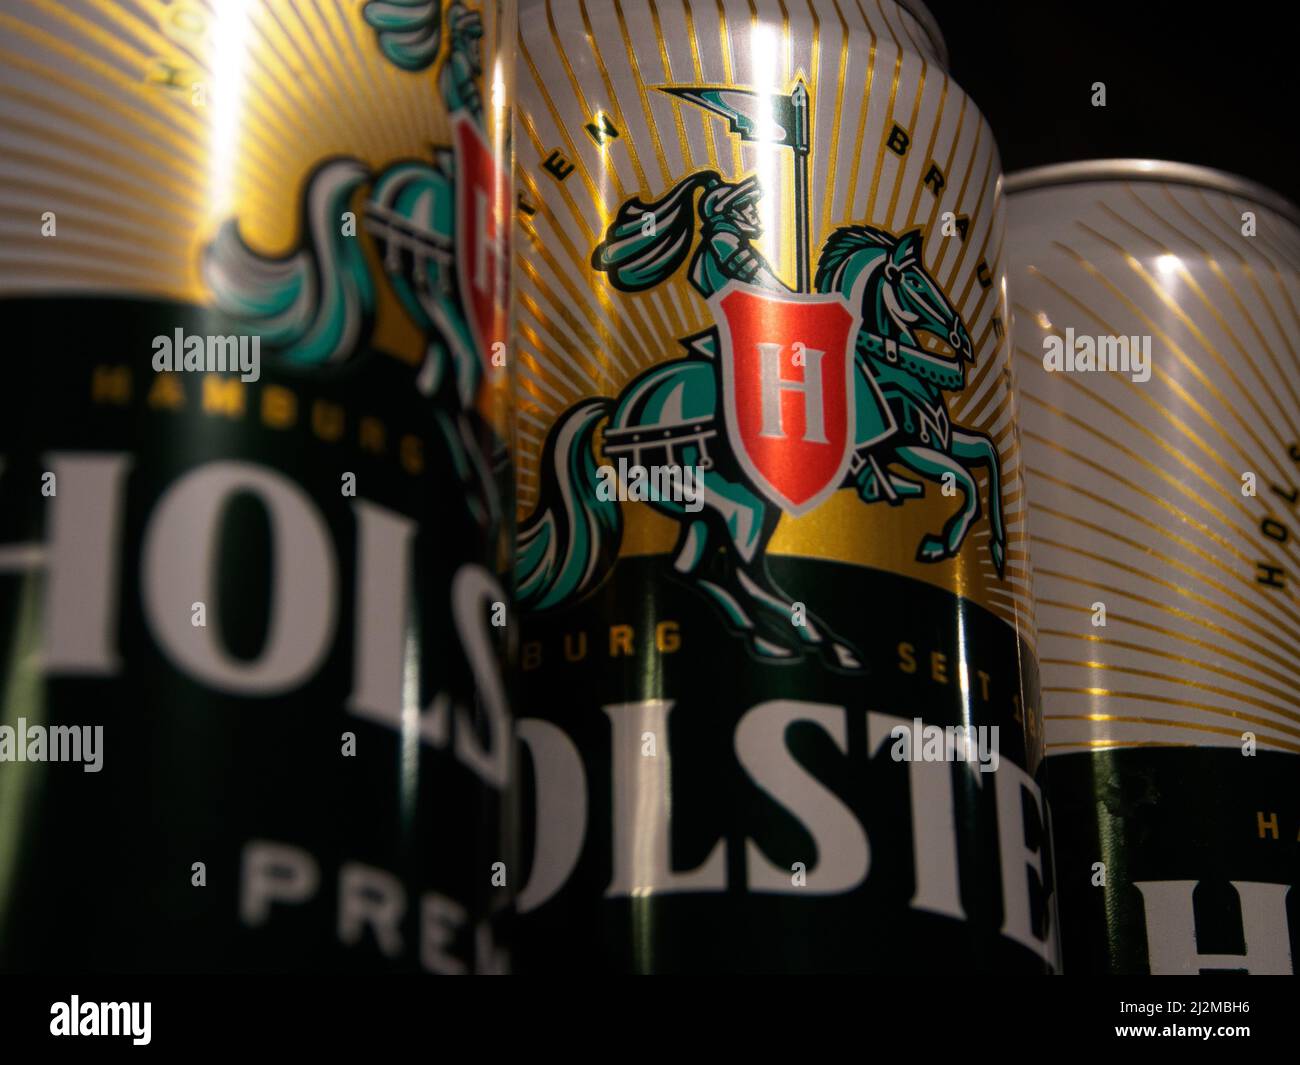 Moscow, Russia. 31st Mar, 2022. Holsten logo seen on beer cans. It was reported that Carlsberg Group is leaving the Russian market and plans to transfer the local business to a new investor. The Danish brewing company 'Carlsberg' is represented in Russia by the brands 'Carlsberg', 'Kronenbourg', 'Holsten' and 'Tuborg' (Photo by Alexander Sayganov/SOPA Images/Sipa USA) Credit: Sipa USA/Alamy Live News Stock Photo